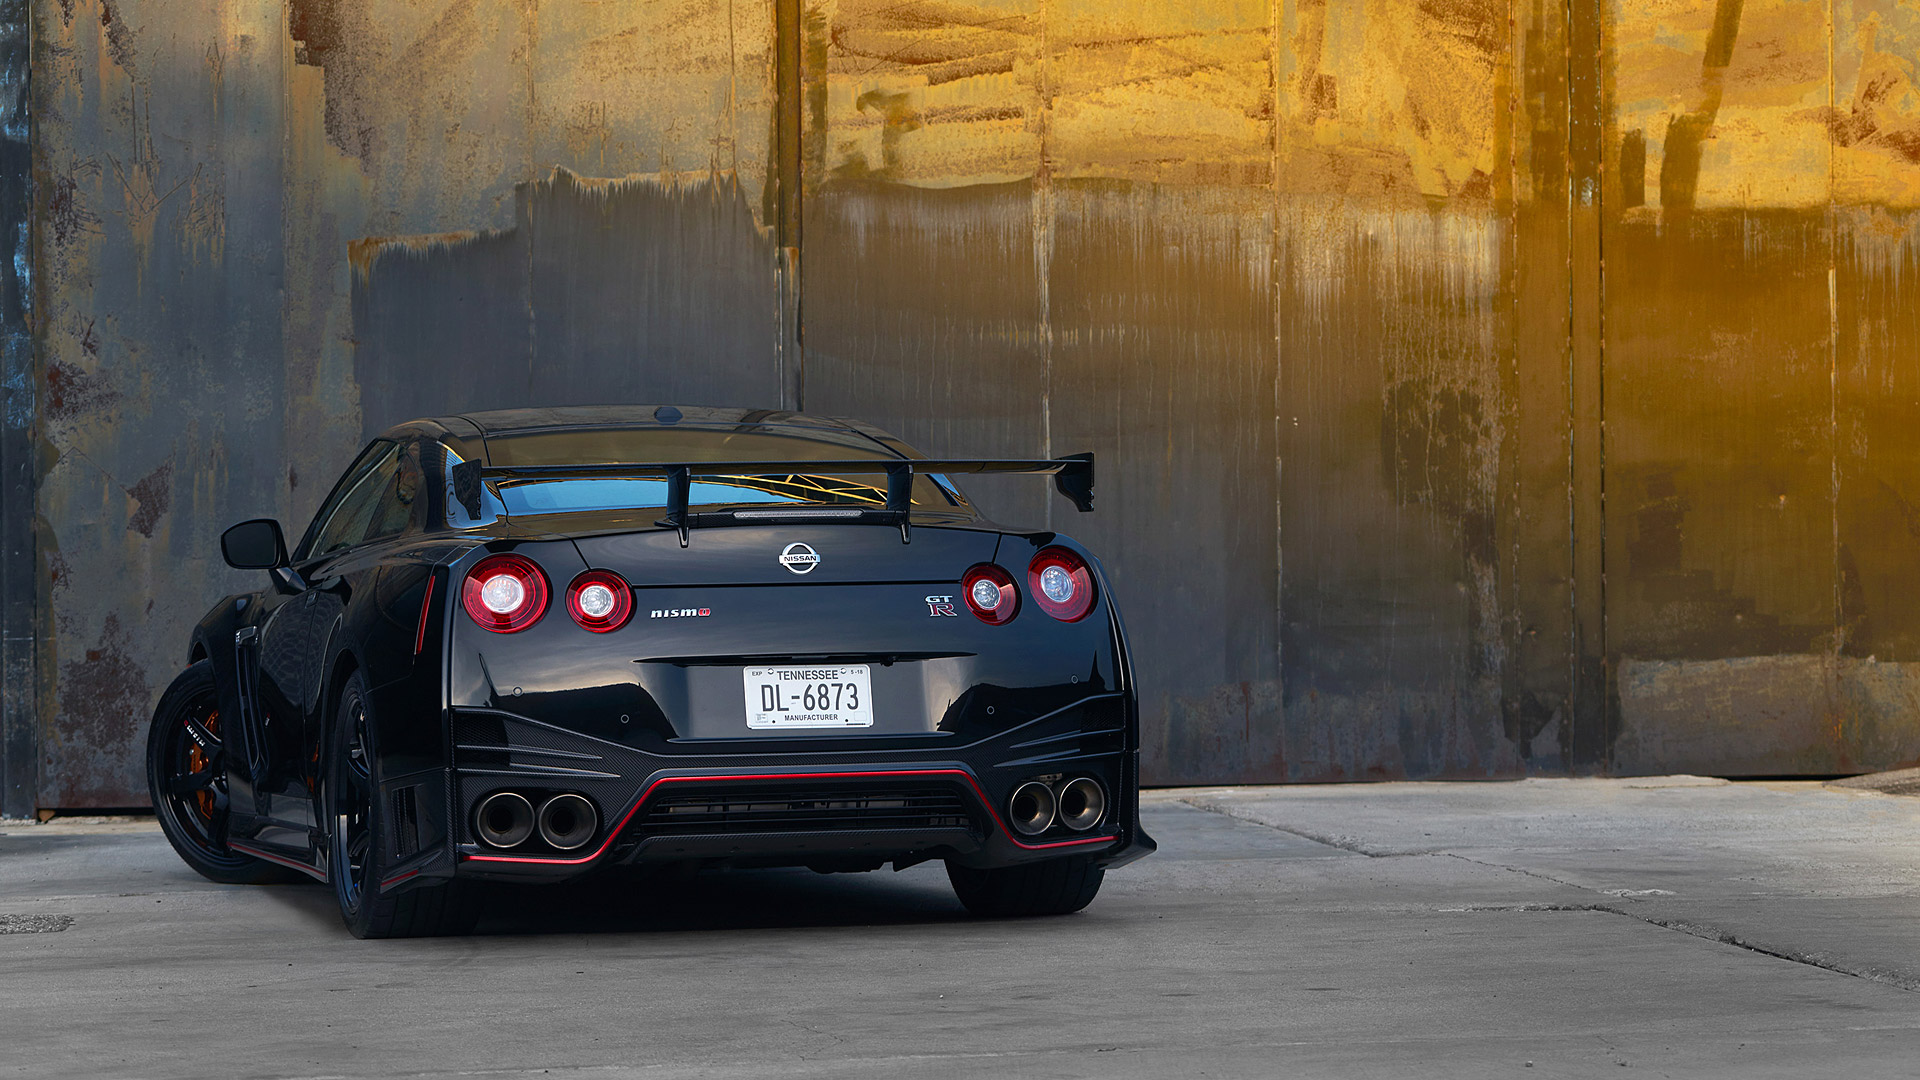 Nissan Gt R Nismo Wallpaper HD Image Wsupercars